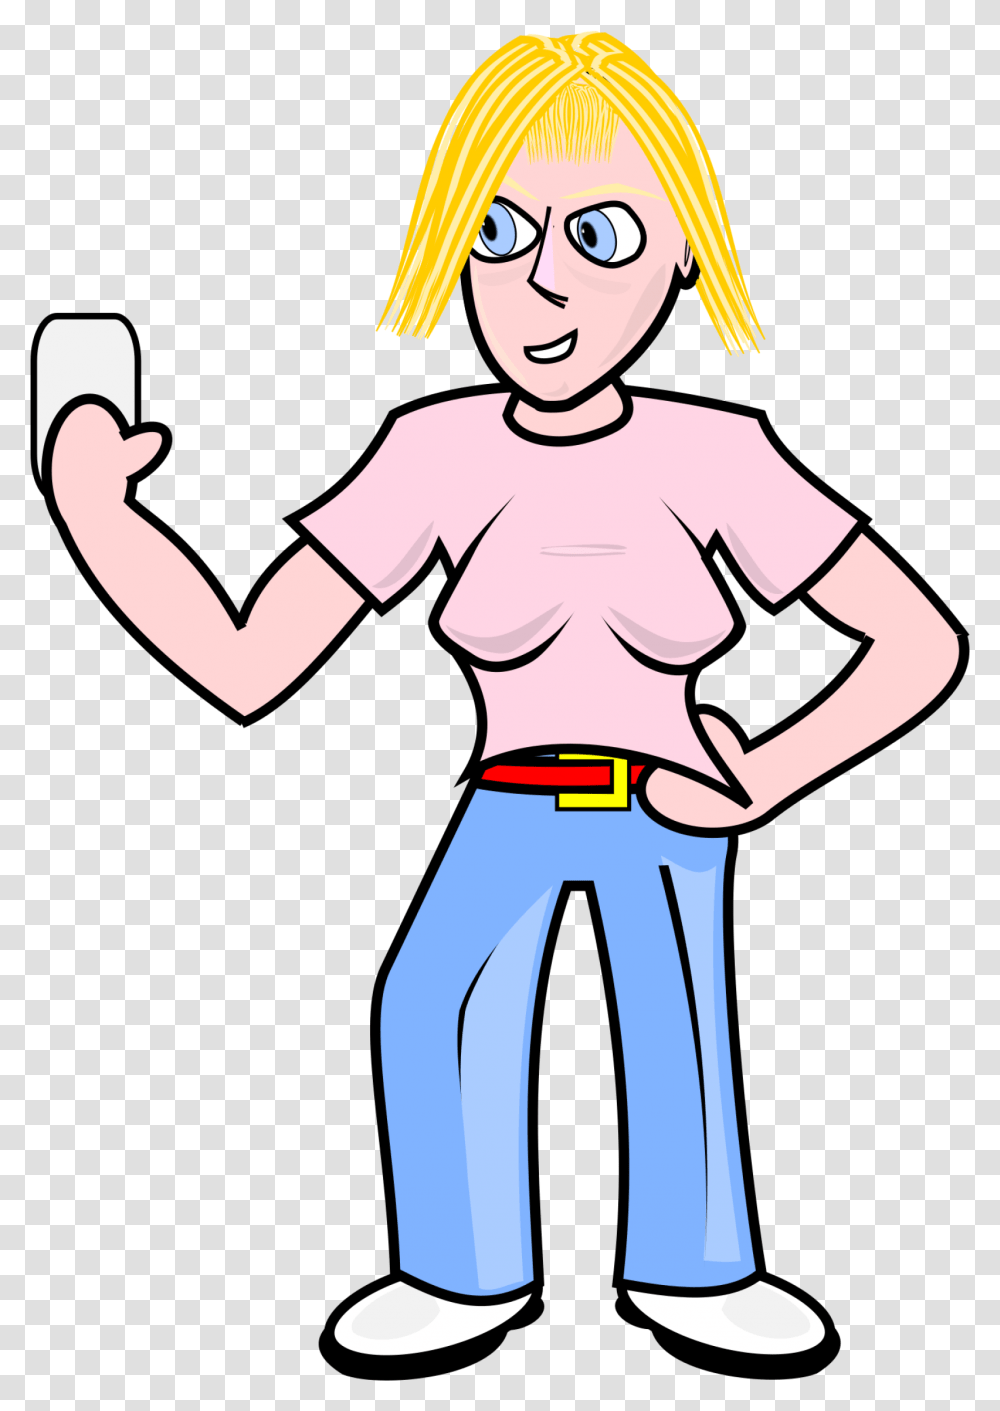 Teen Girl 001 Clip Arts For Web Teenager Clipart, Person, Hand, Shorts, Label Transparent Png